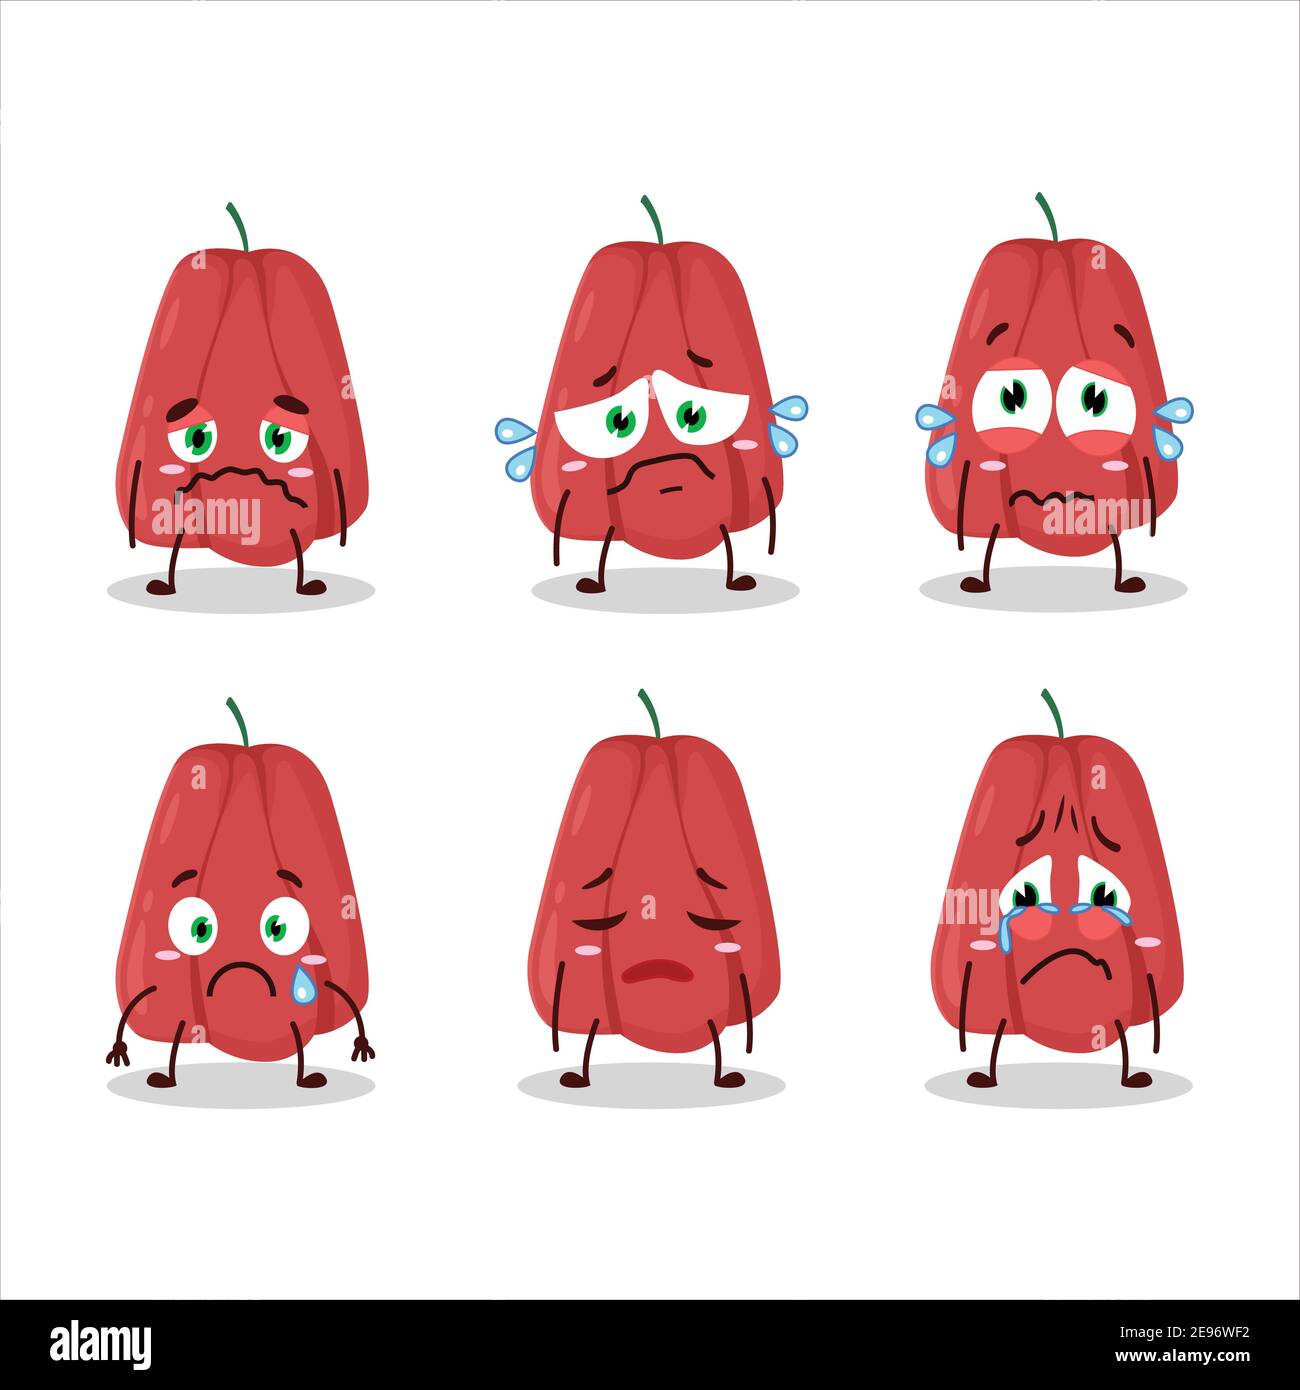 Ackee cartoon in character with sad expression. Vector illustration Stock Vector